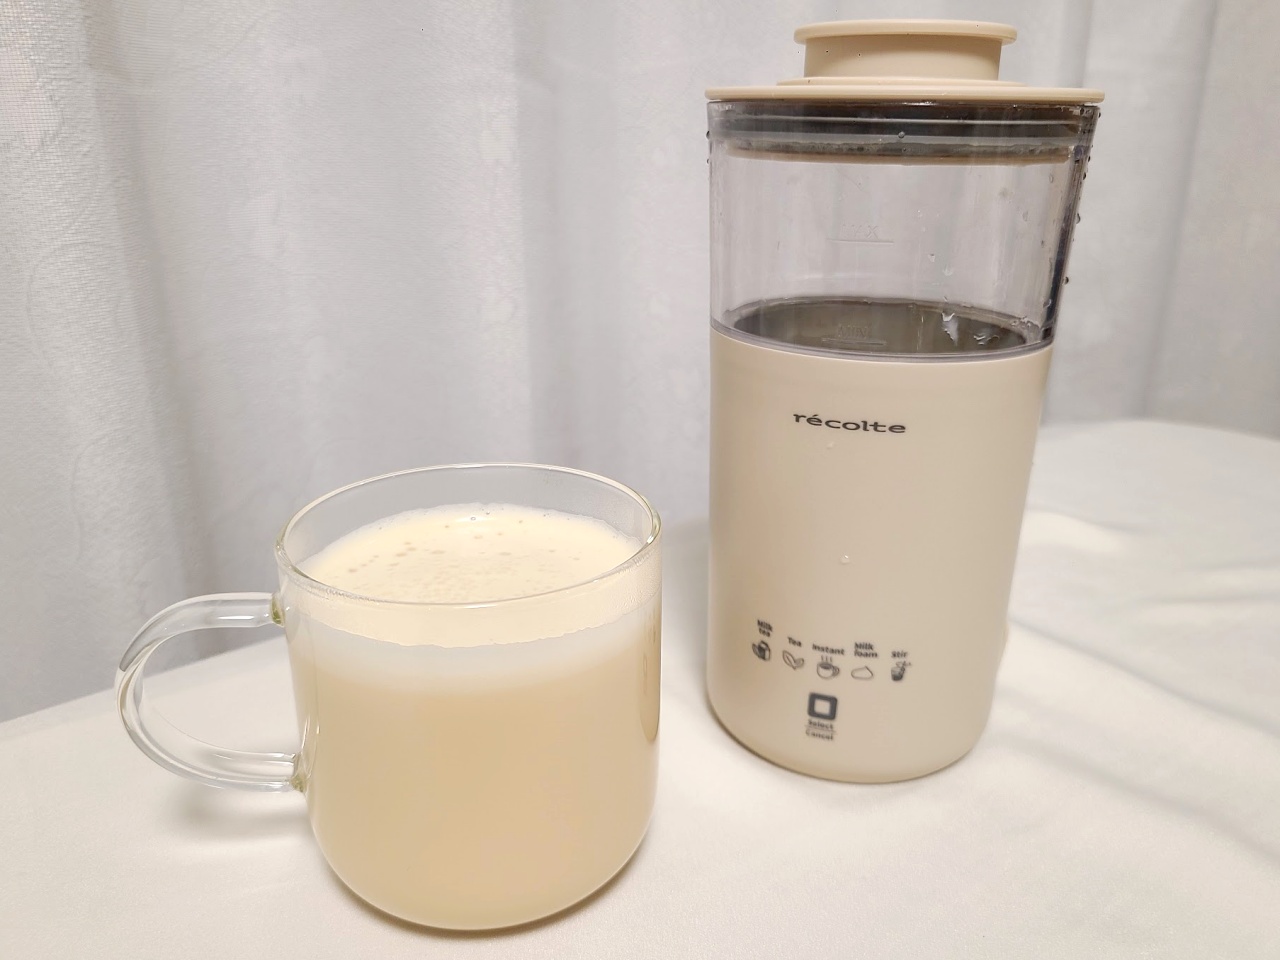 Nestlé's Special.T tea maker to be given debut in gadget-loving Japan